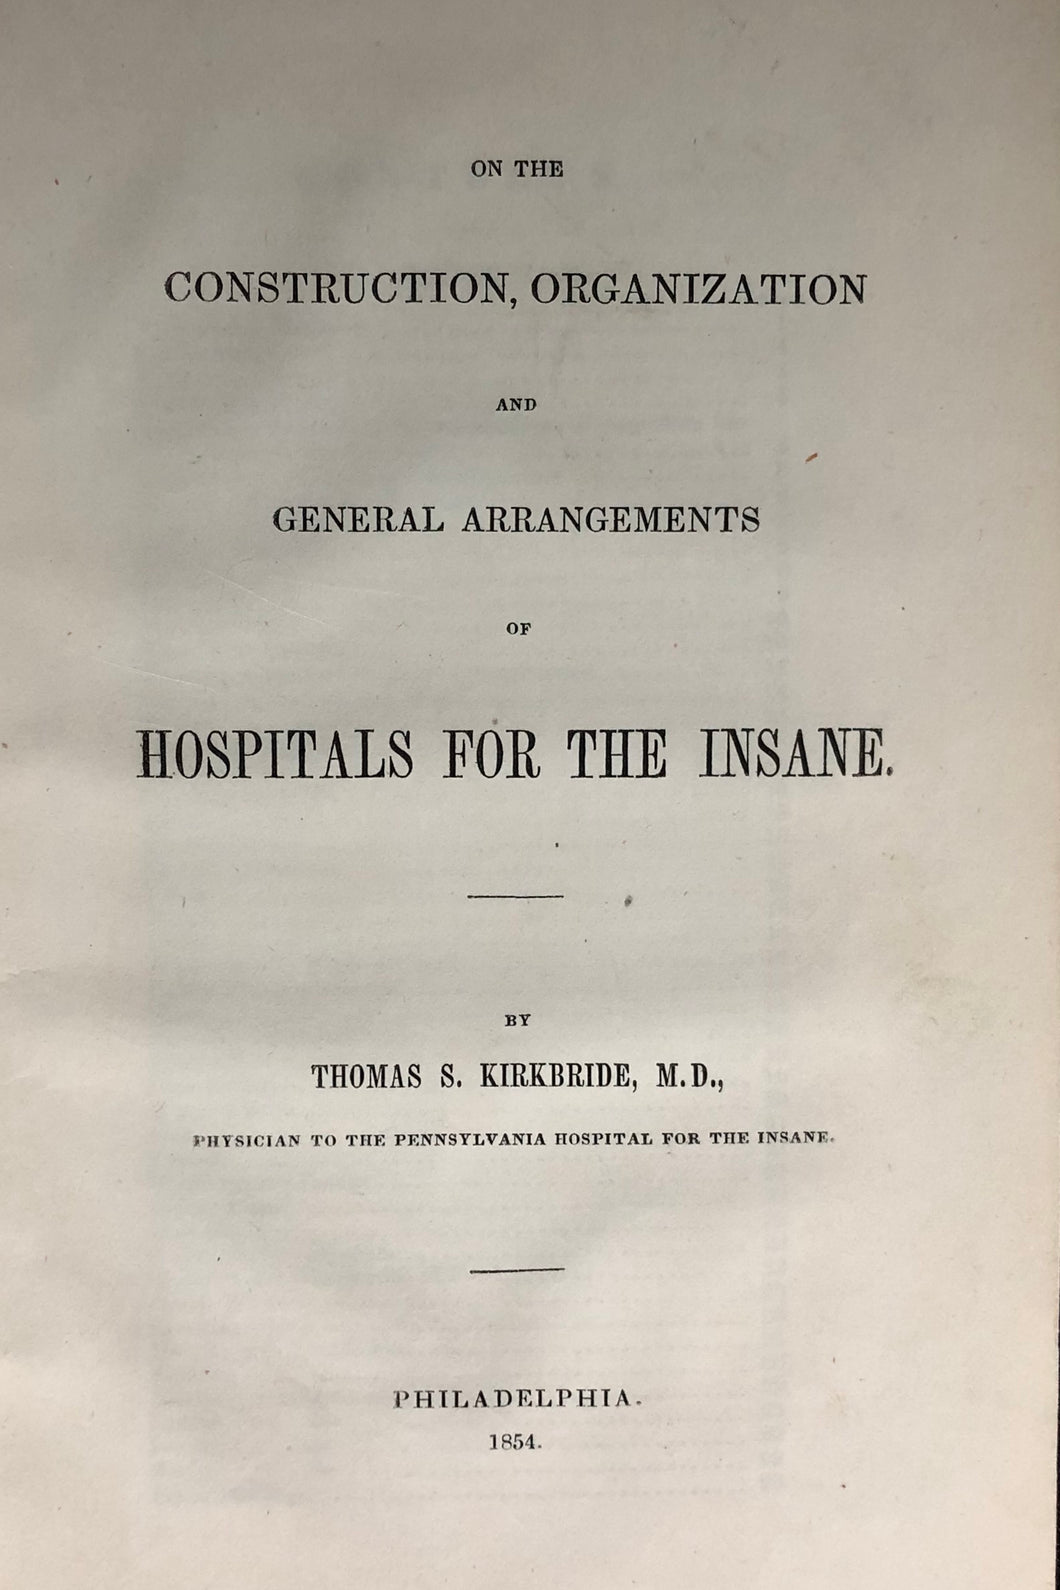 On the construction, organization, and general arrangements of hospitals for the insane